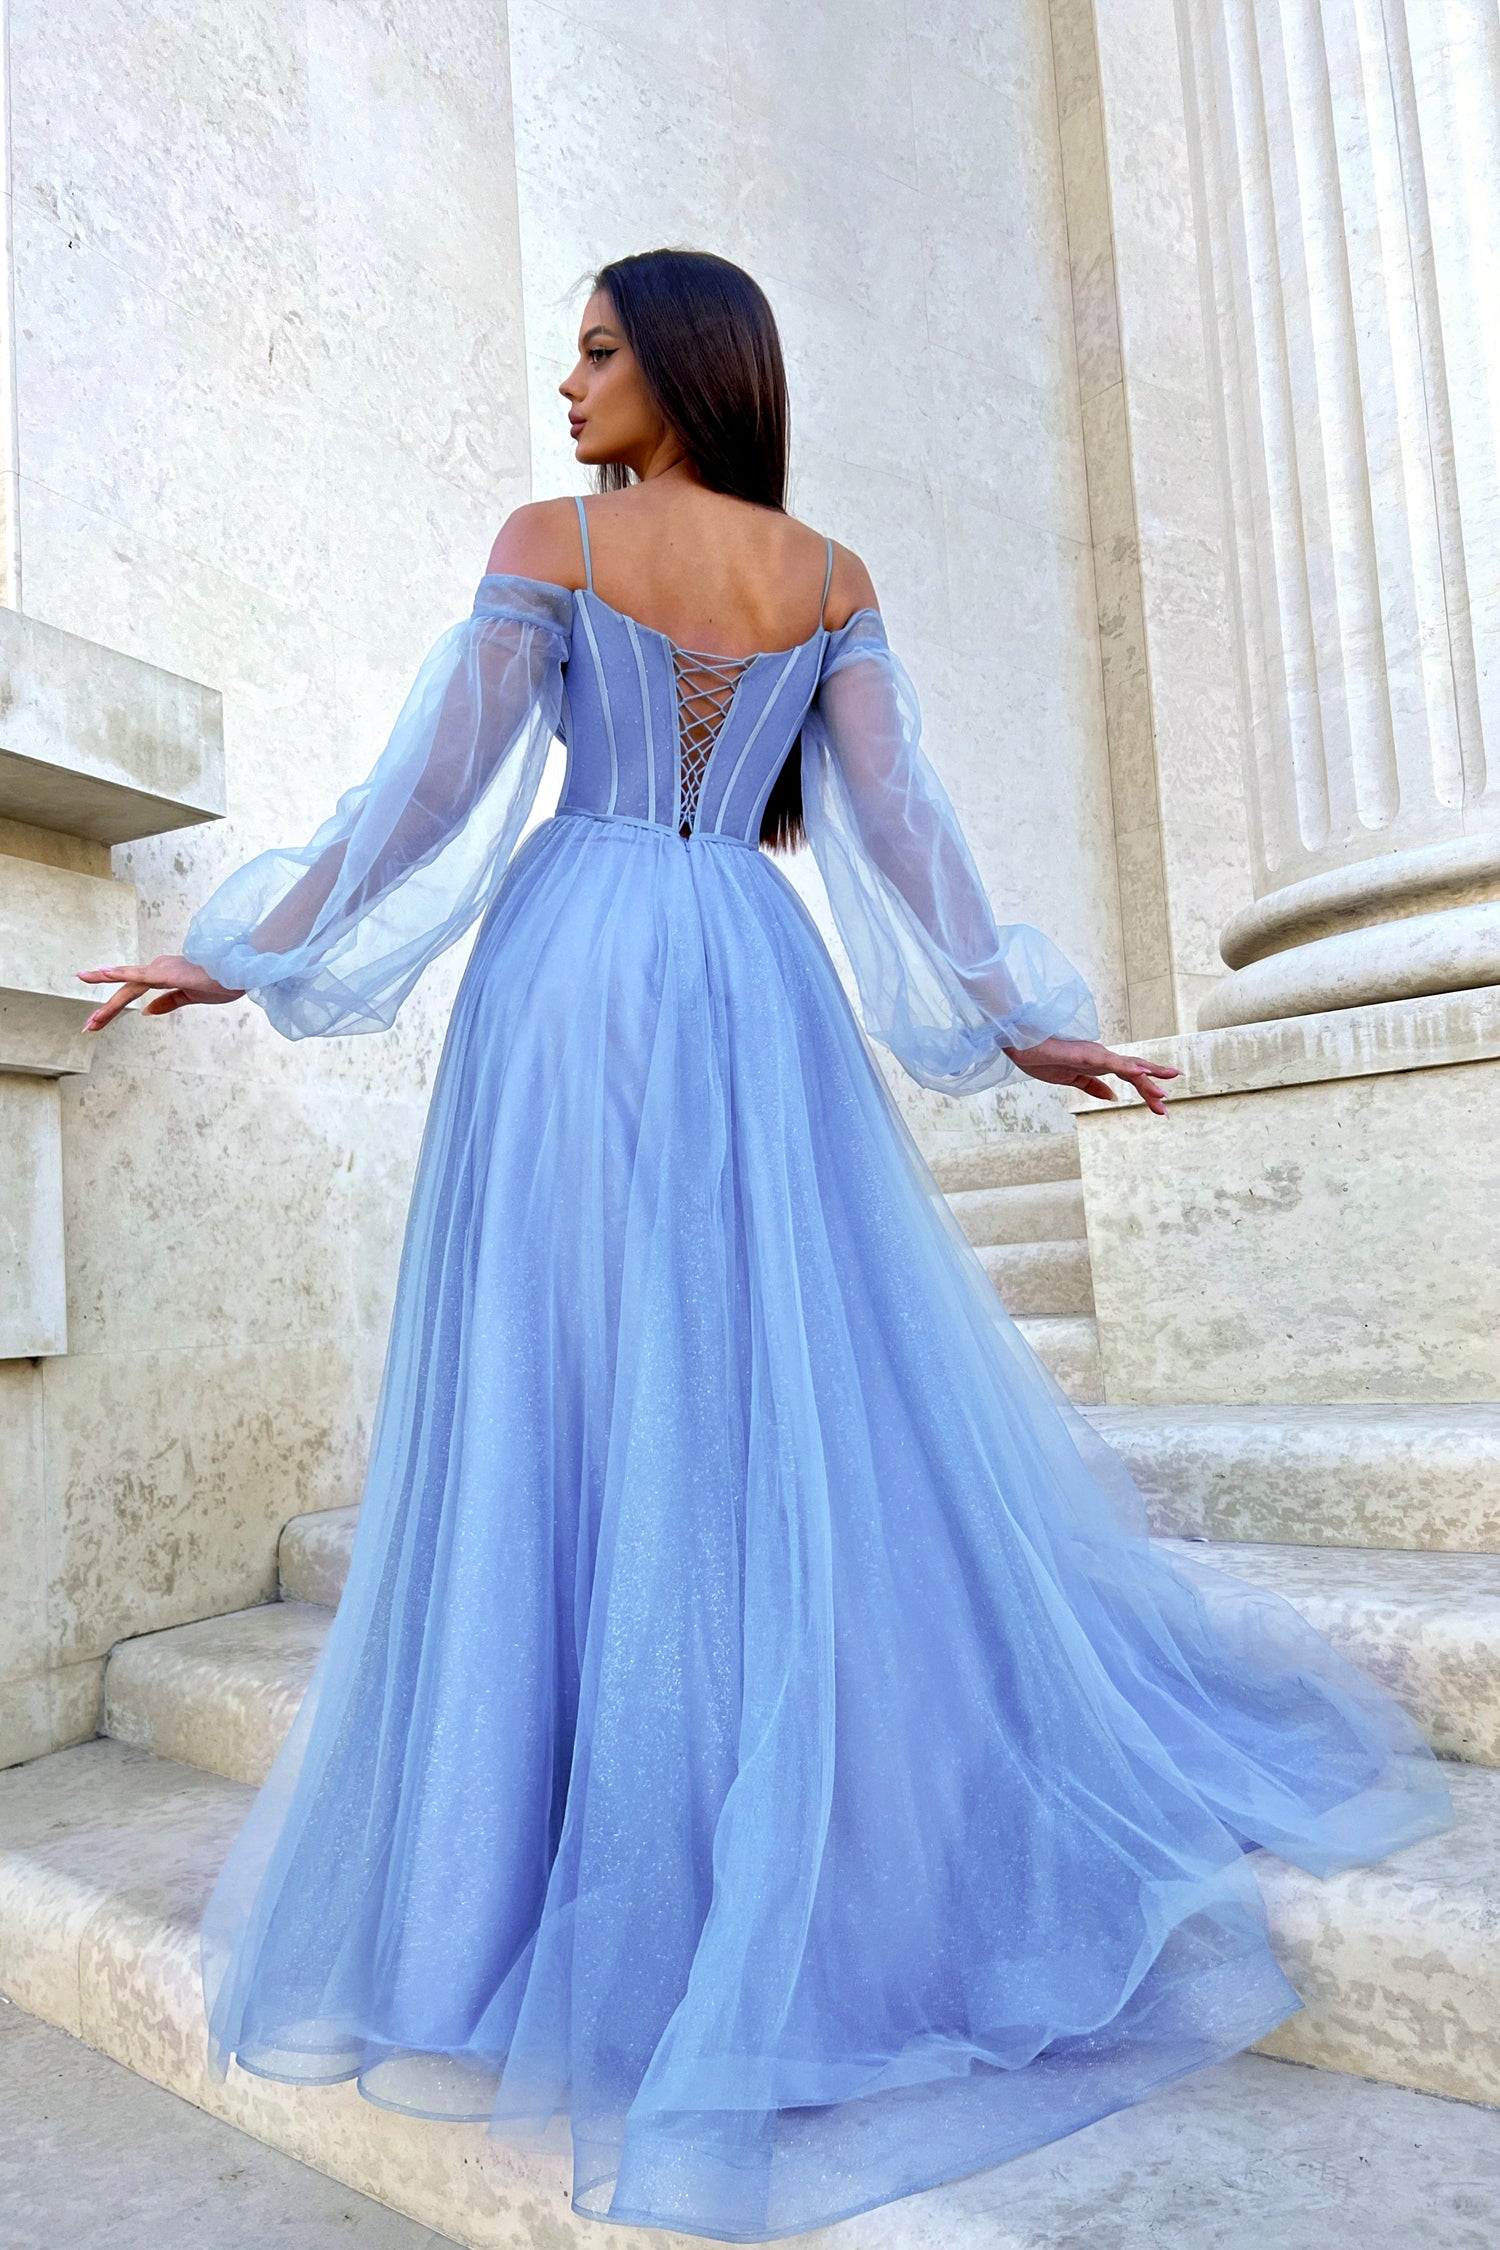 Tina Holly Couture TK130 Blue Blossom Long Sleeve Ball Gown Formal Dress